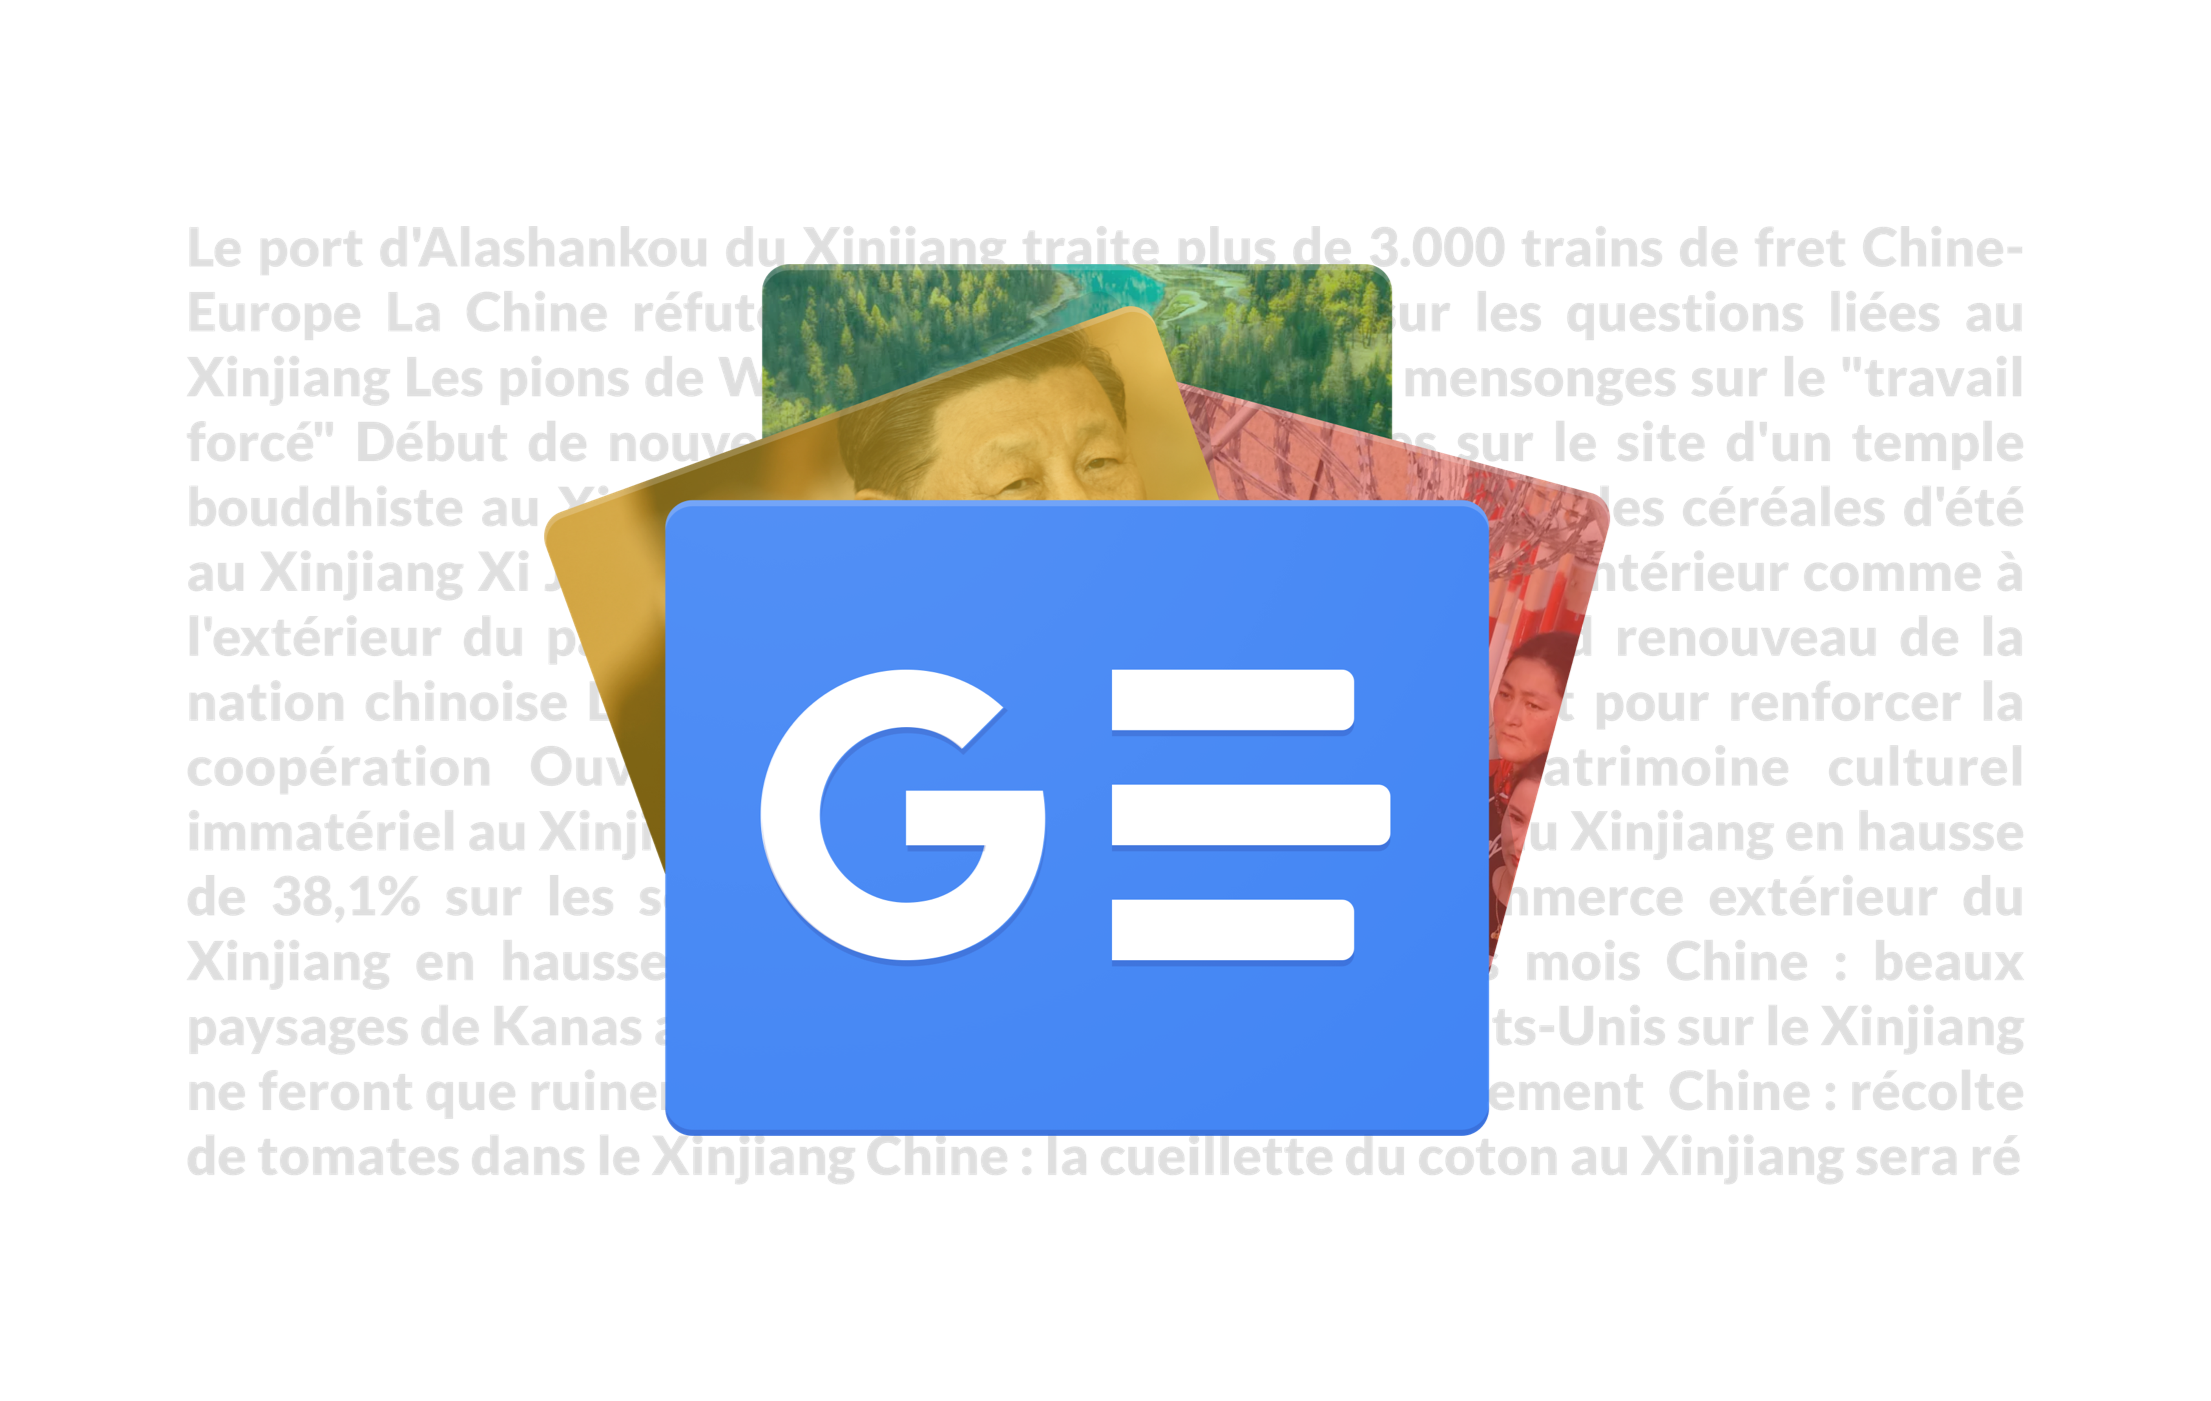 Chinese Media's Influence in Google News on Xinjiang